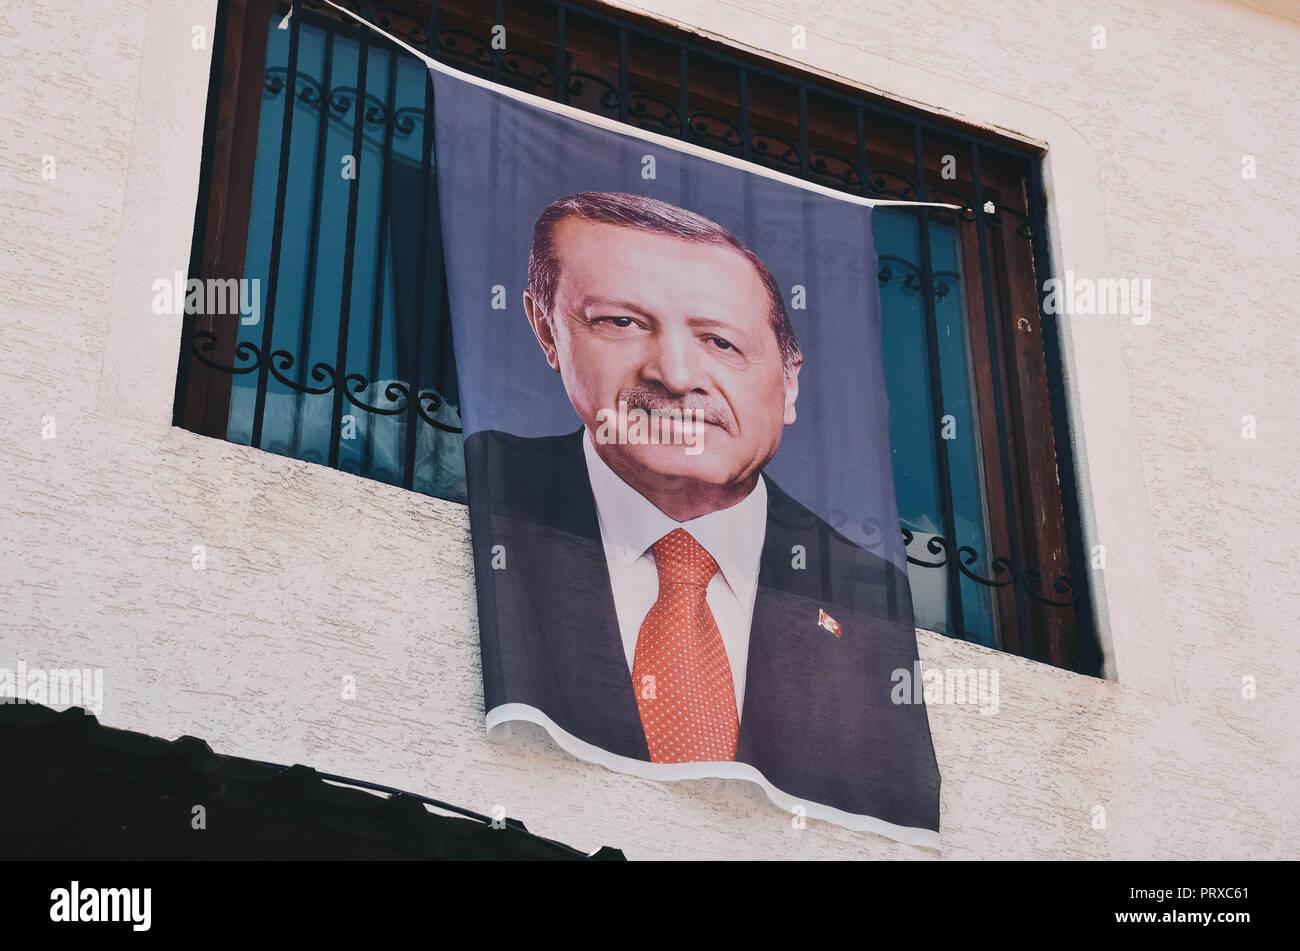 A portrait of Turkish president Recep Tayyip Erdoğan hanging from a house and shop, Old Bazaar, Skopje, Republic of Macedonia, September 2018 Stock Photo